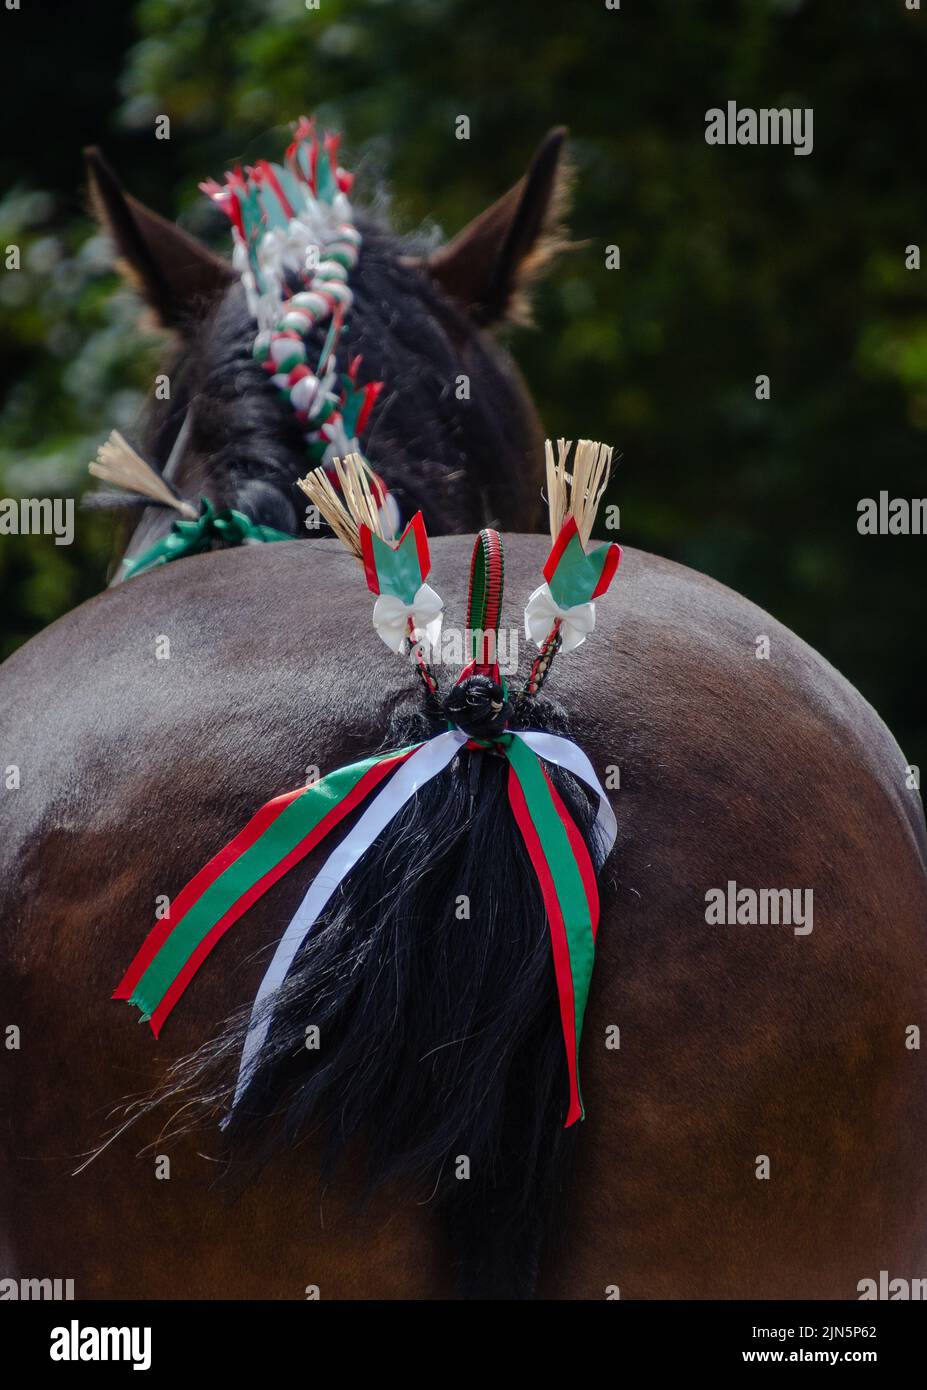 shire horse from behind Stock Photo